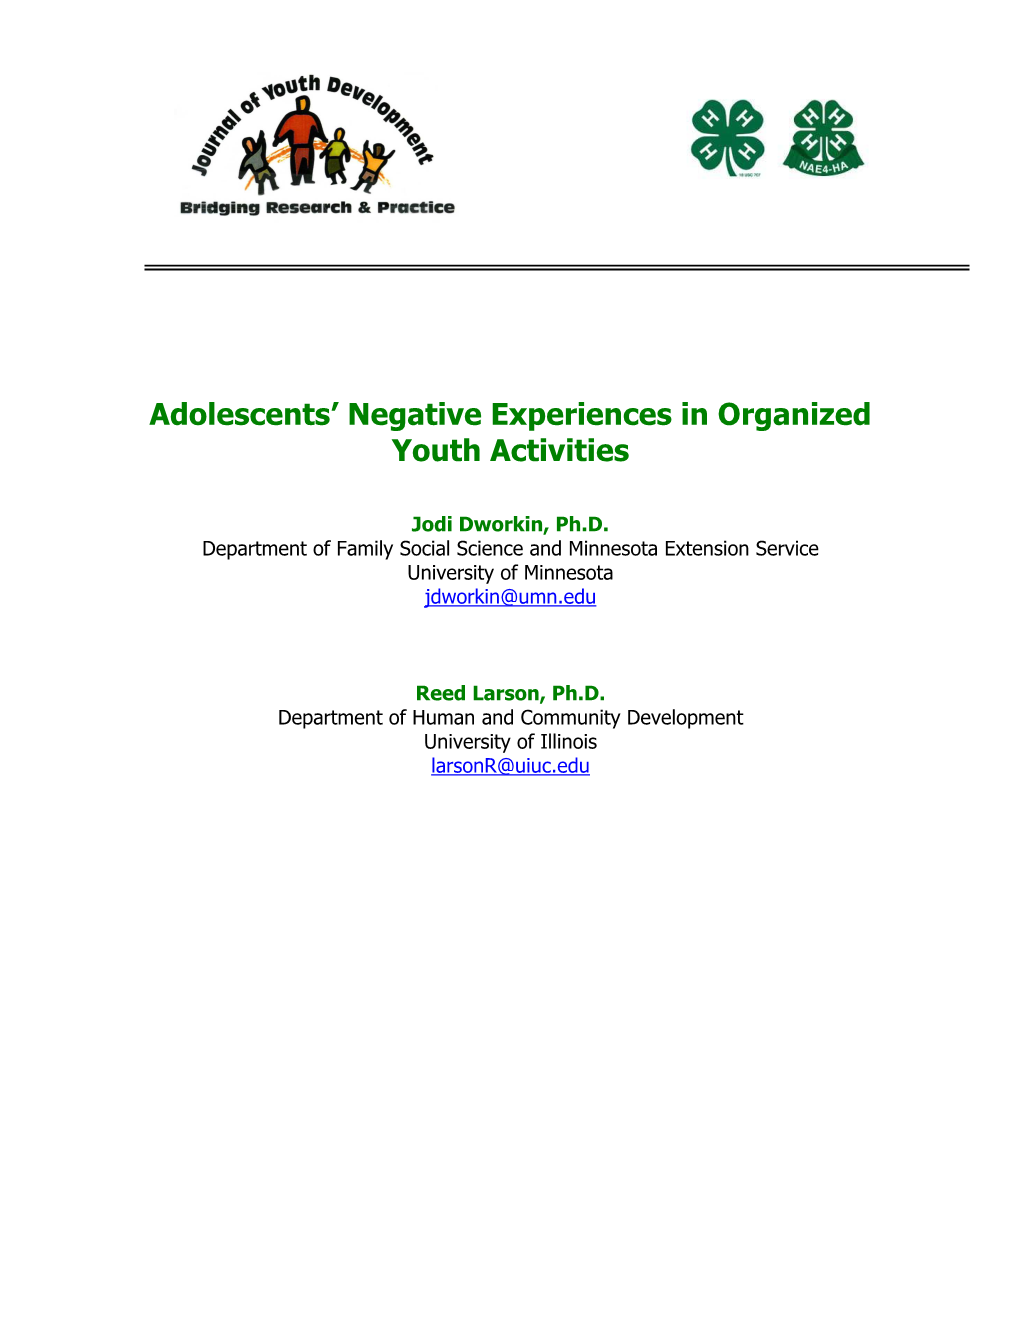 Adolescents' Negative Experiences in Organized Youth Activities